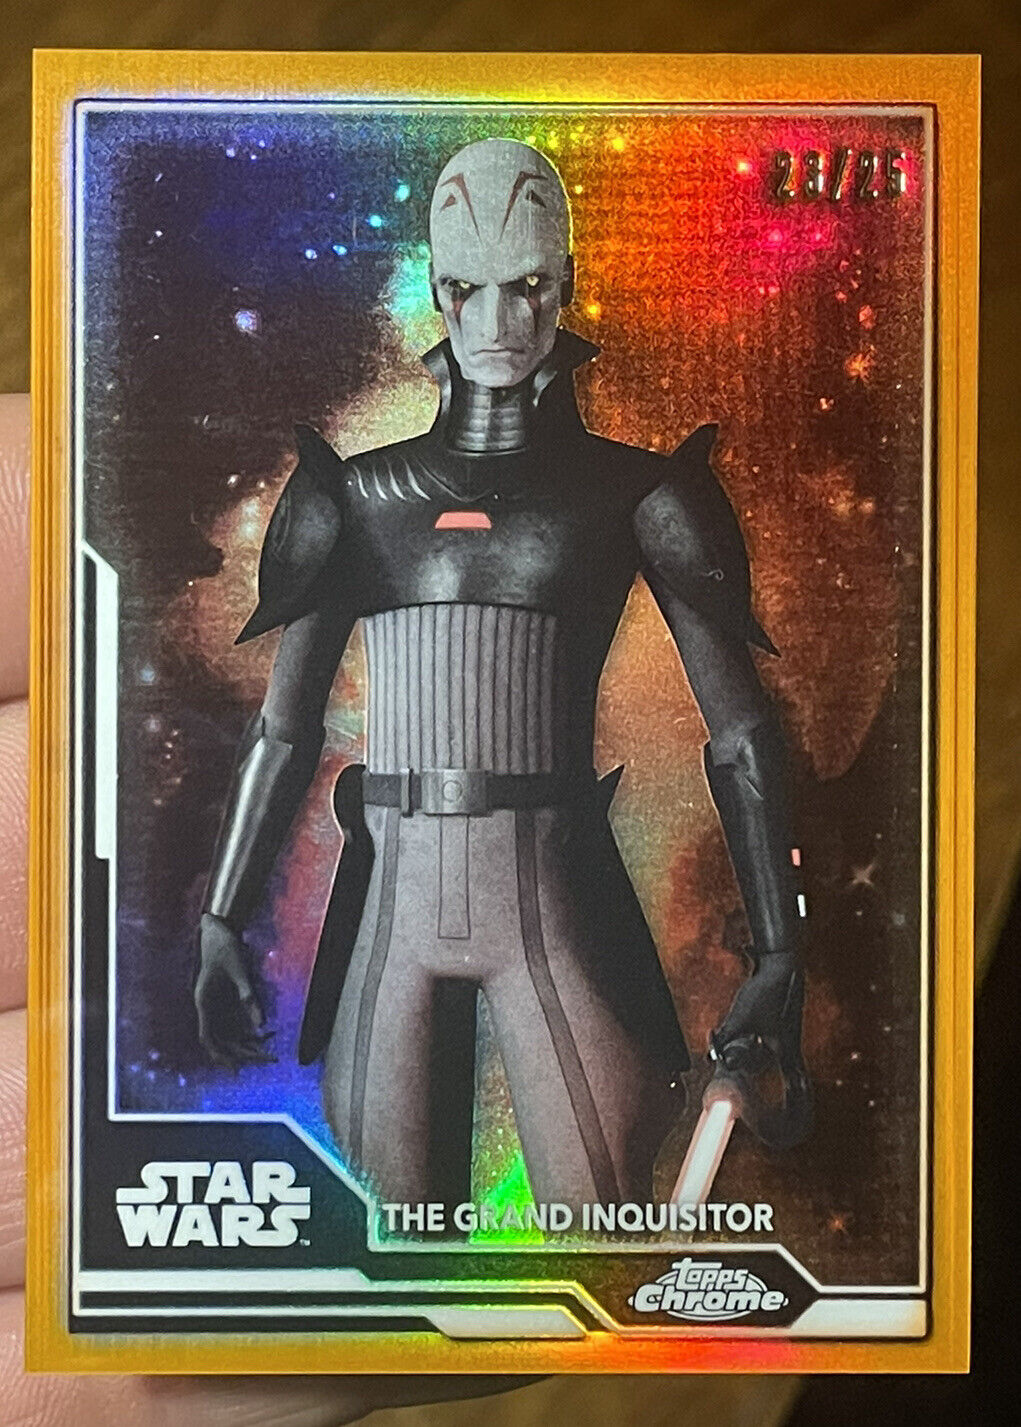 TOPPS STAR WARS CHROME LEGACY /25 ORANGE REFRACTOR THE GRAND INQUSITOR PACK PULL